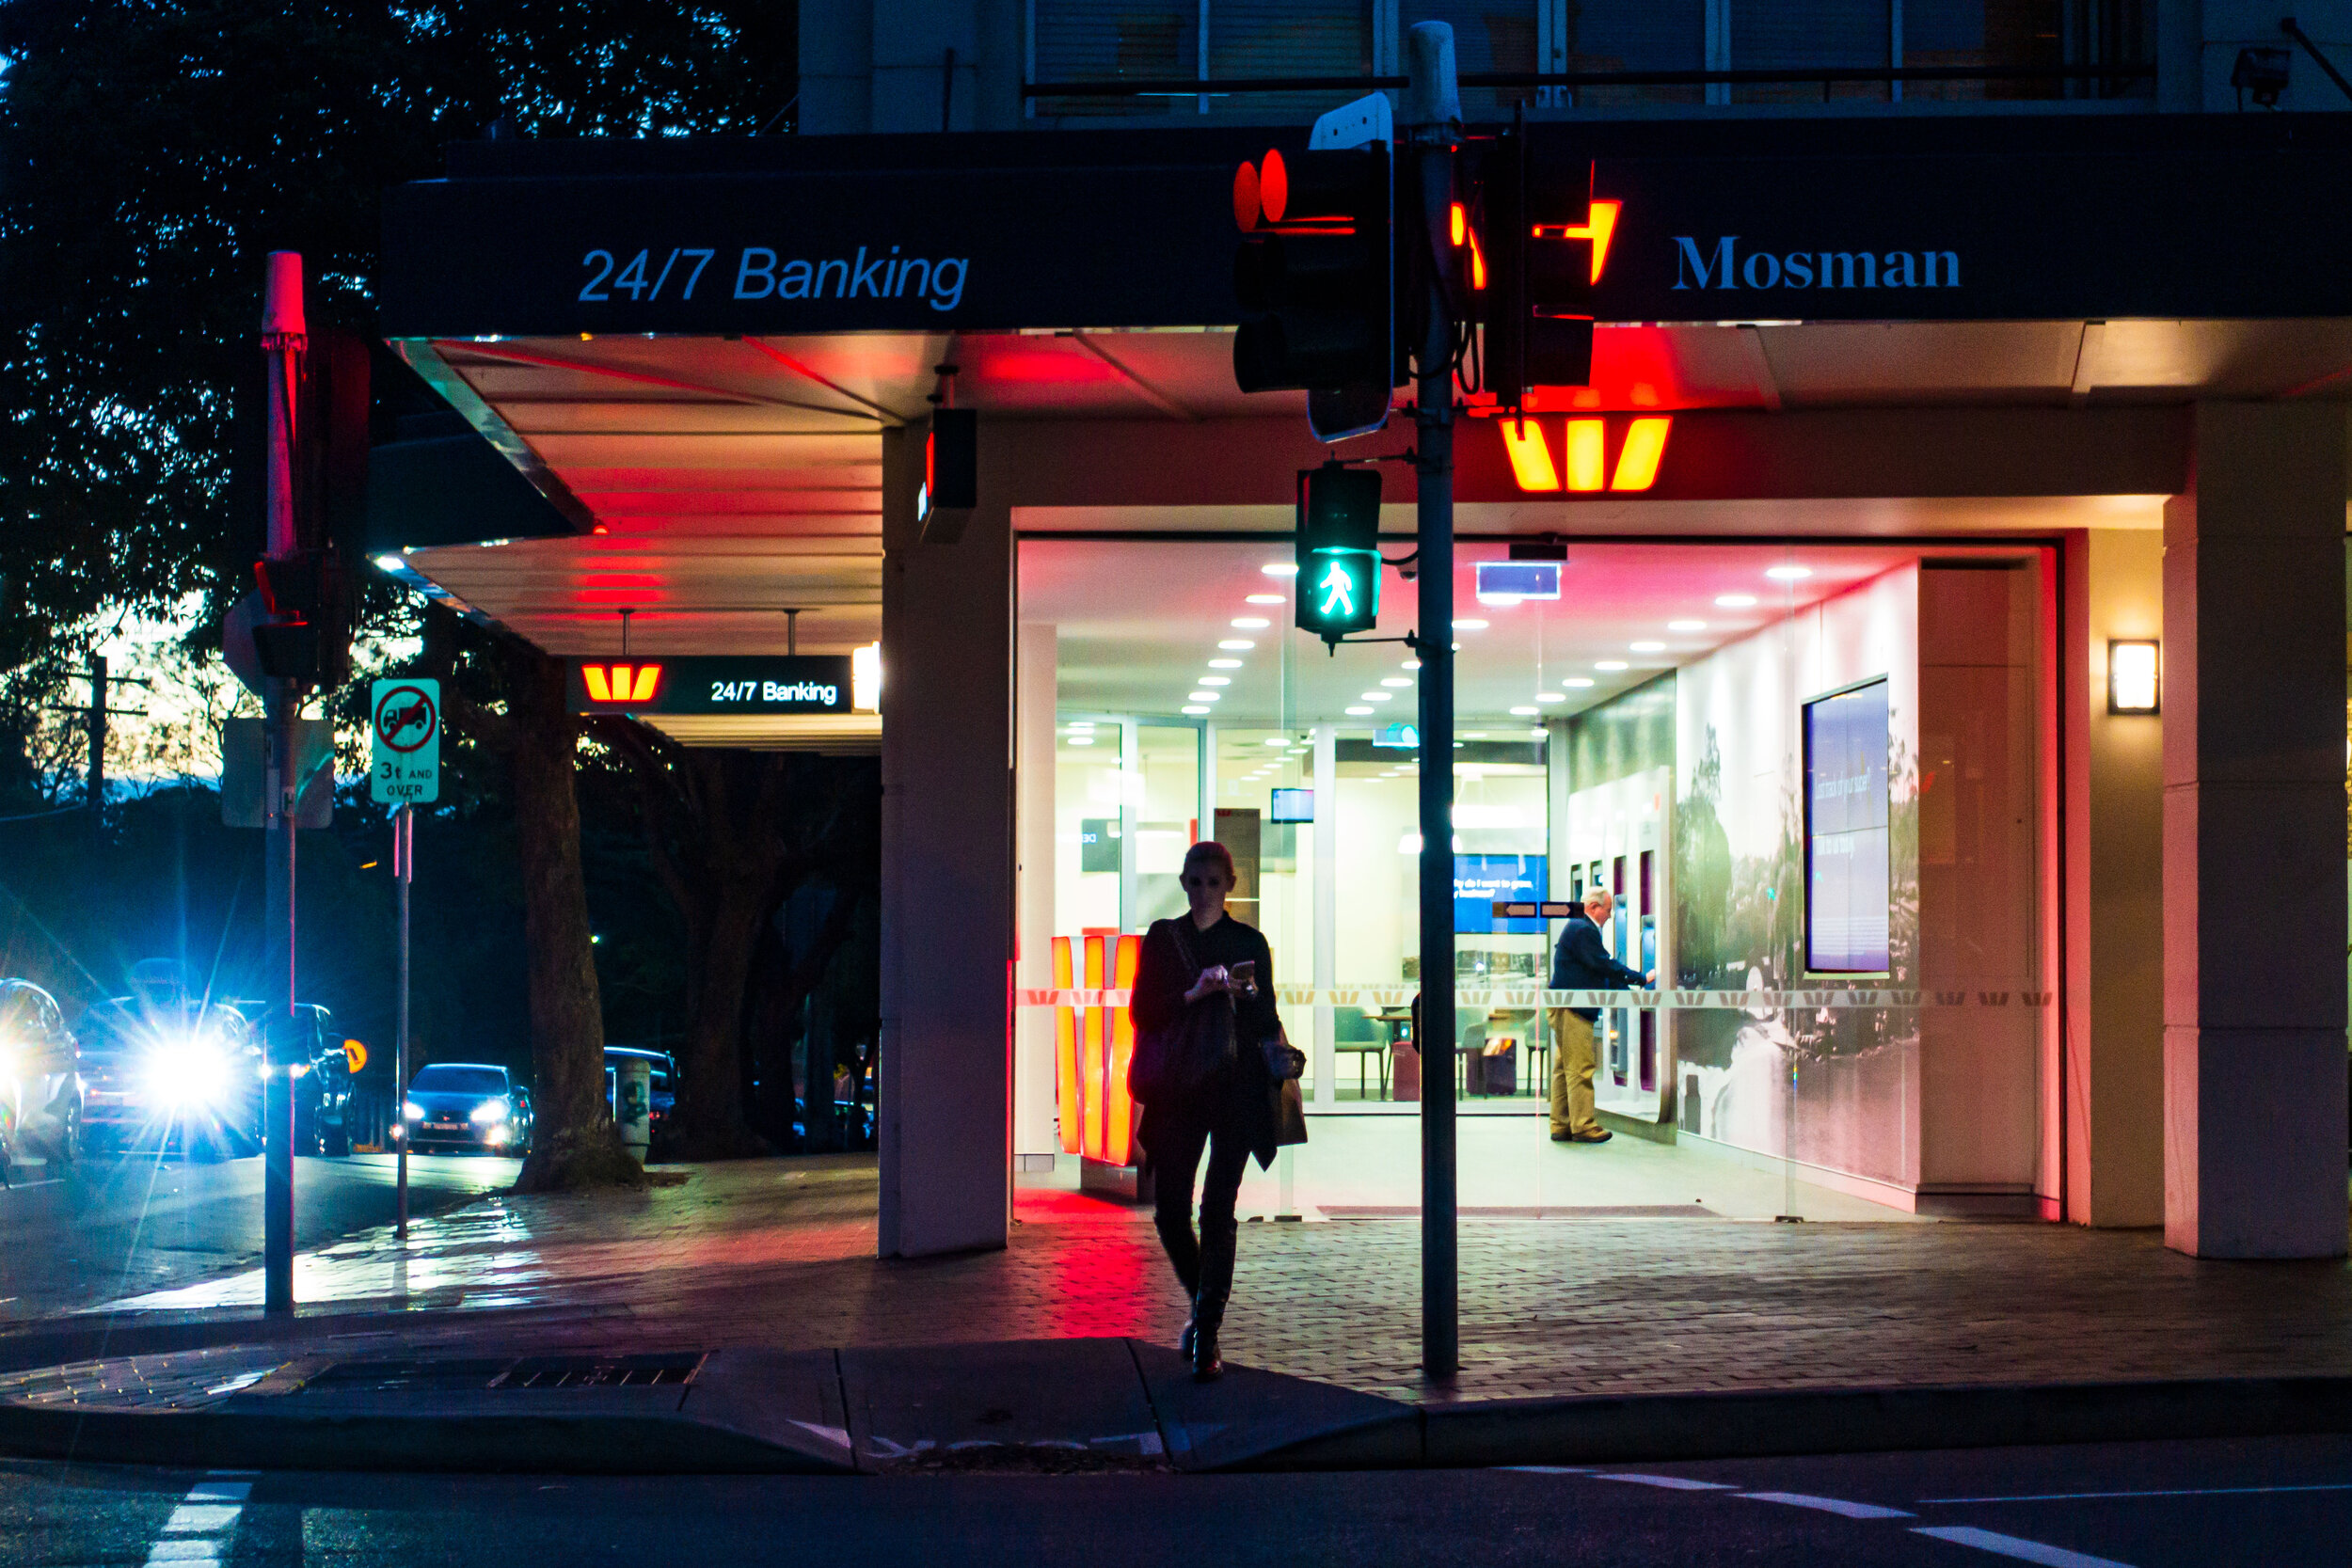 Westpac Bank, Mosman NSW 2016. Banks have never needed daylight to carry out robberies.